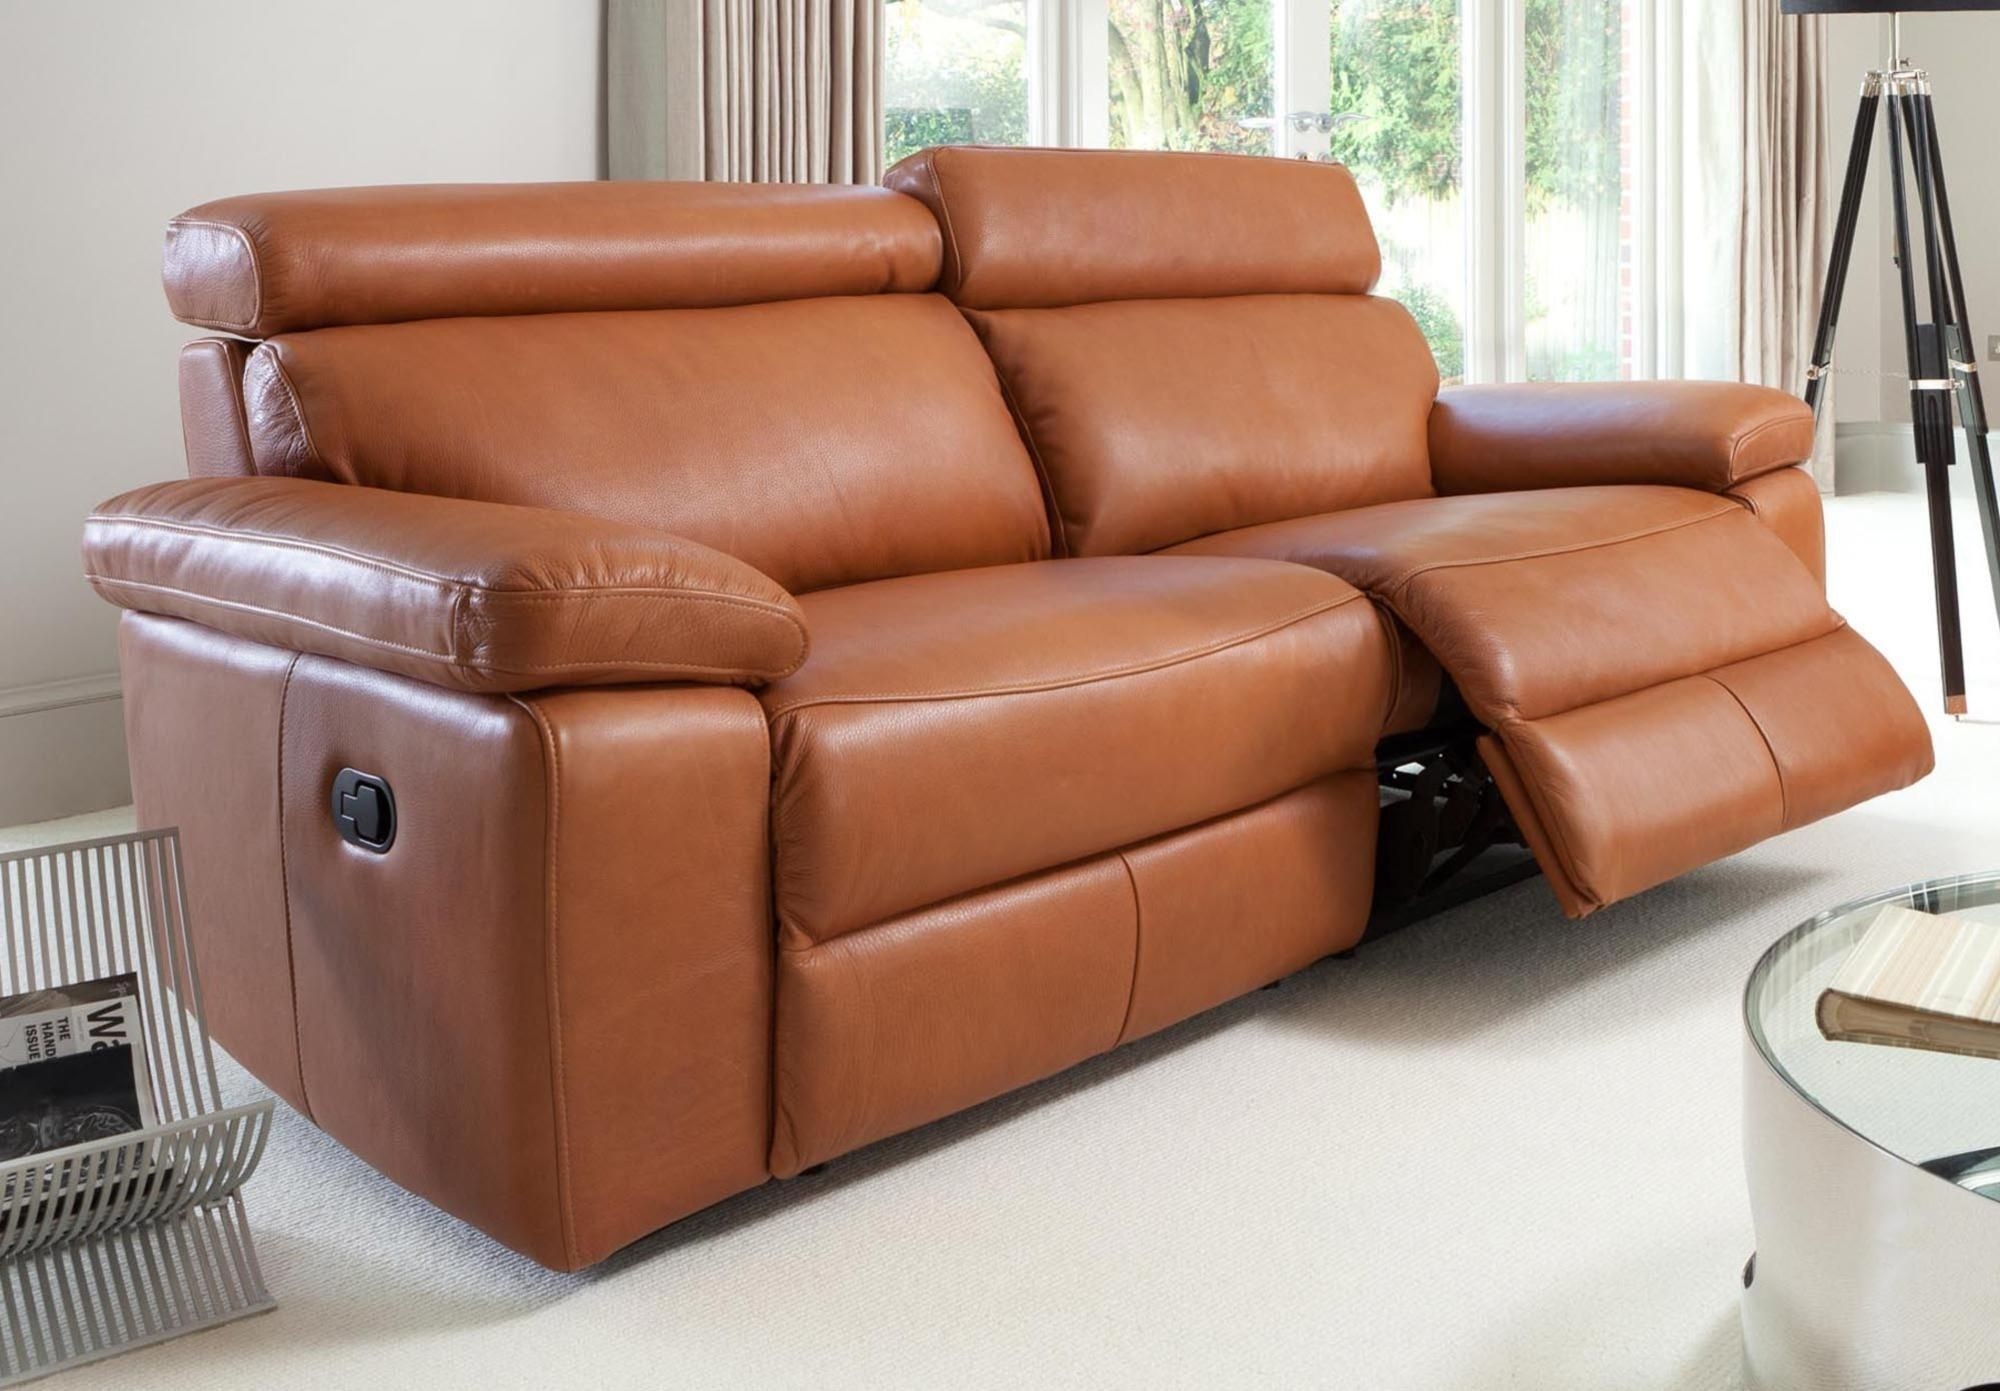 81 inch leather reclining sofa